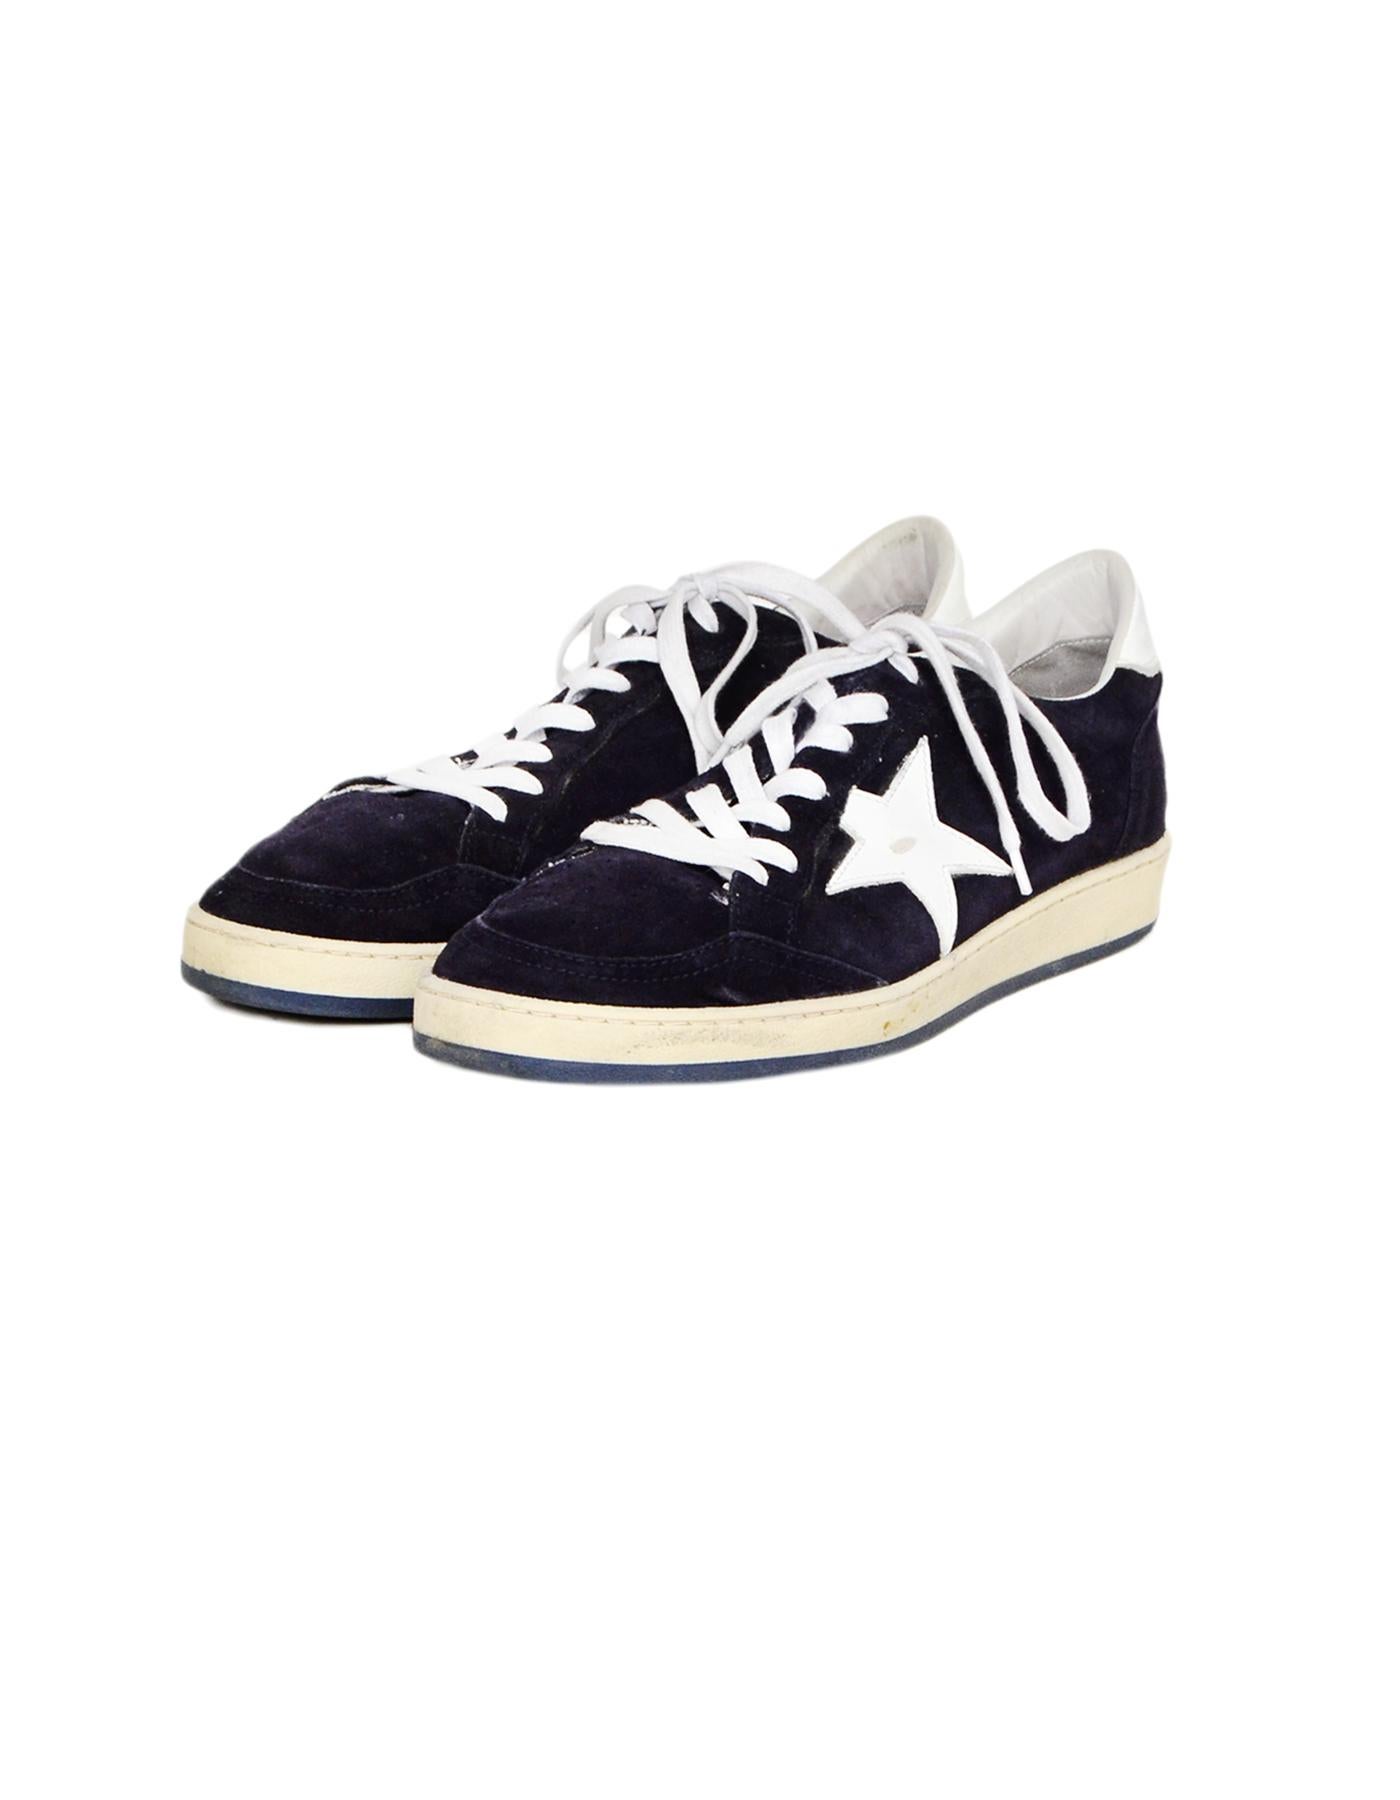 Golden Goose Deluxe Brand GGDB Navy Suede/White Leather Low-Top Ballstar Sneakers Sz 41

Made In: Italy
Color: Navy/white
Materials: Suede, leather, rubber
Closure/Opening: Lace up front
Overall Condition: Very good pre-owned condition with